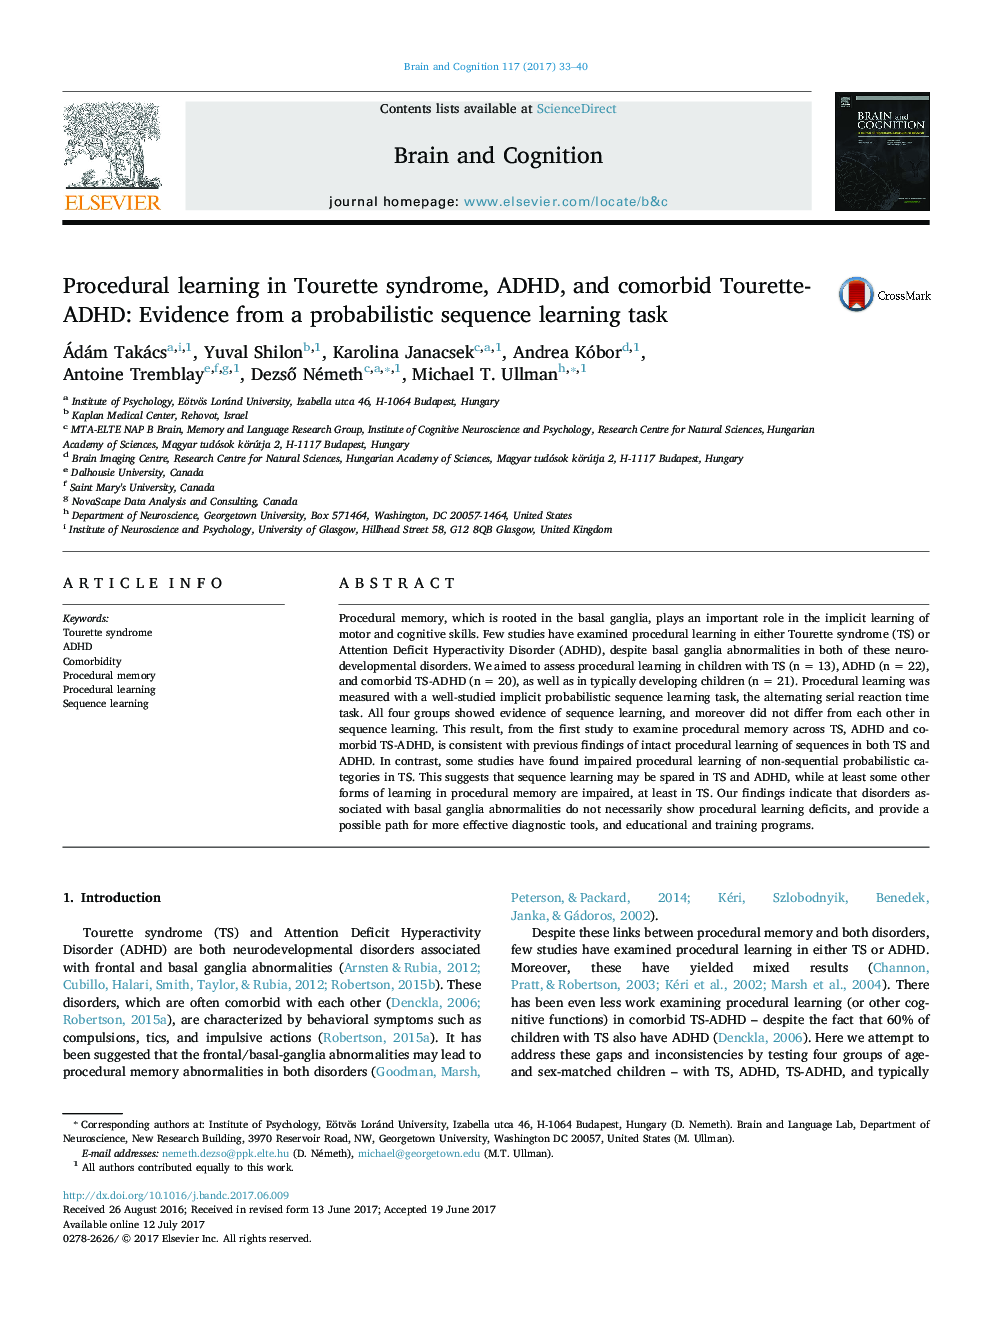 Procedural learning in Tourette syndrome, ADHD, and comorbid Tourette-ADHD: Evidence from a probabilistic sequence learning task